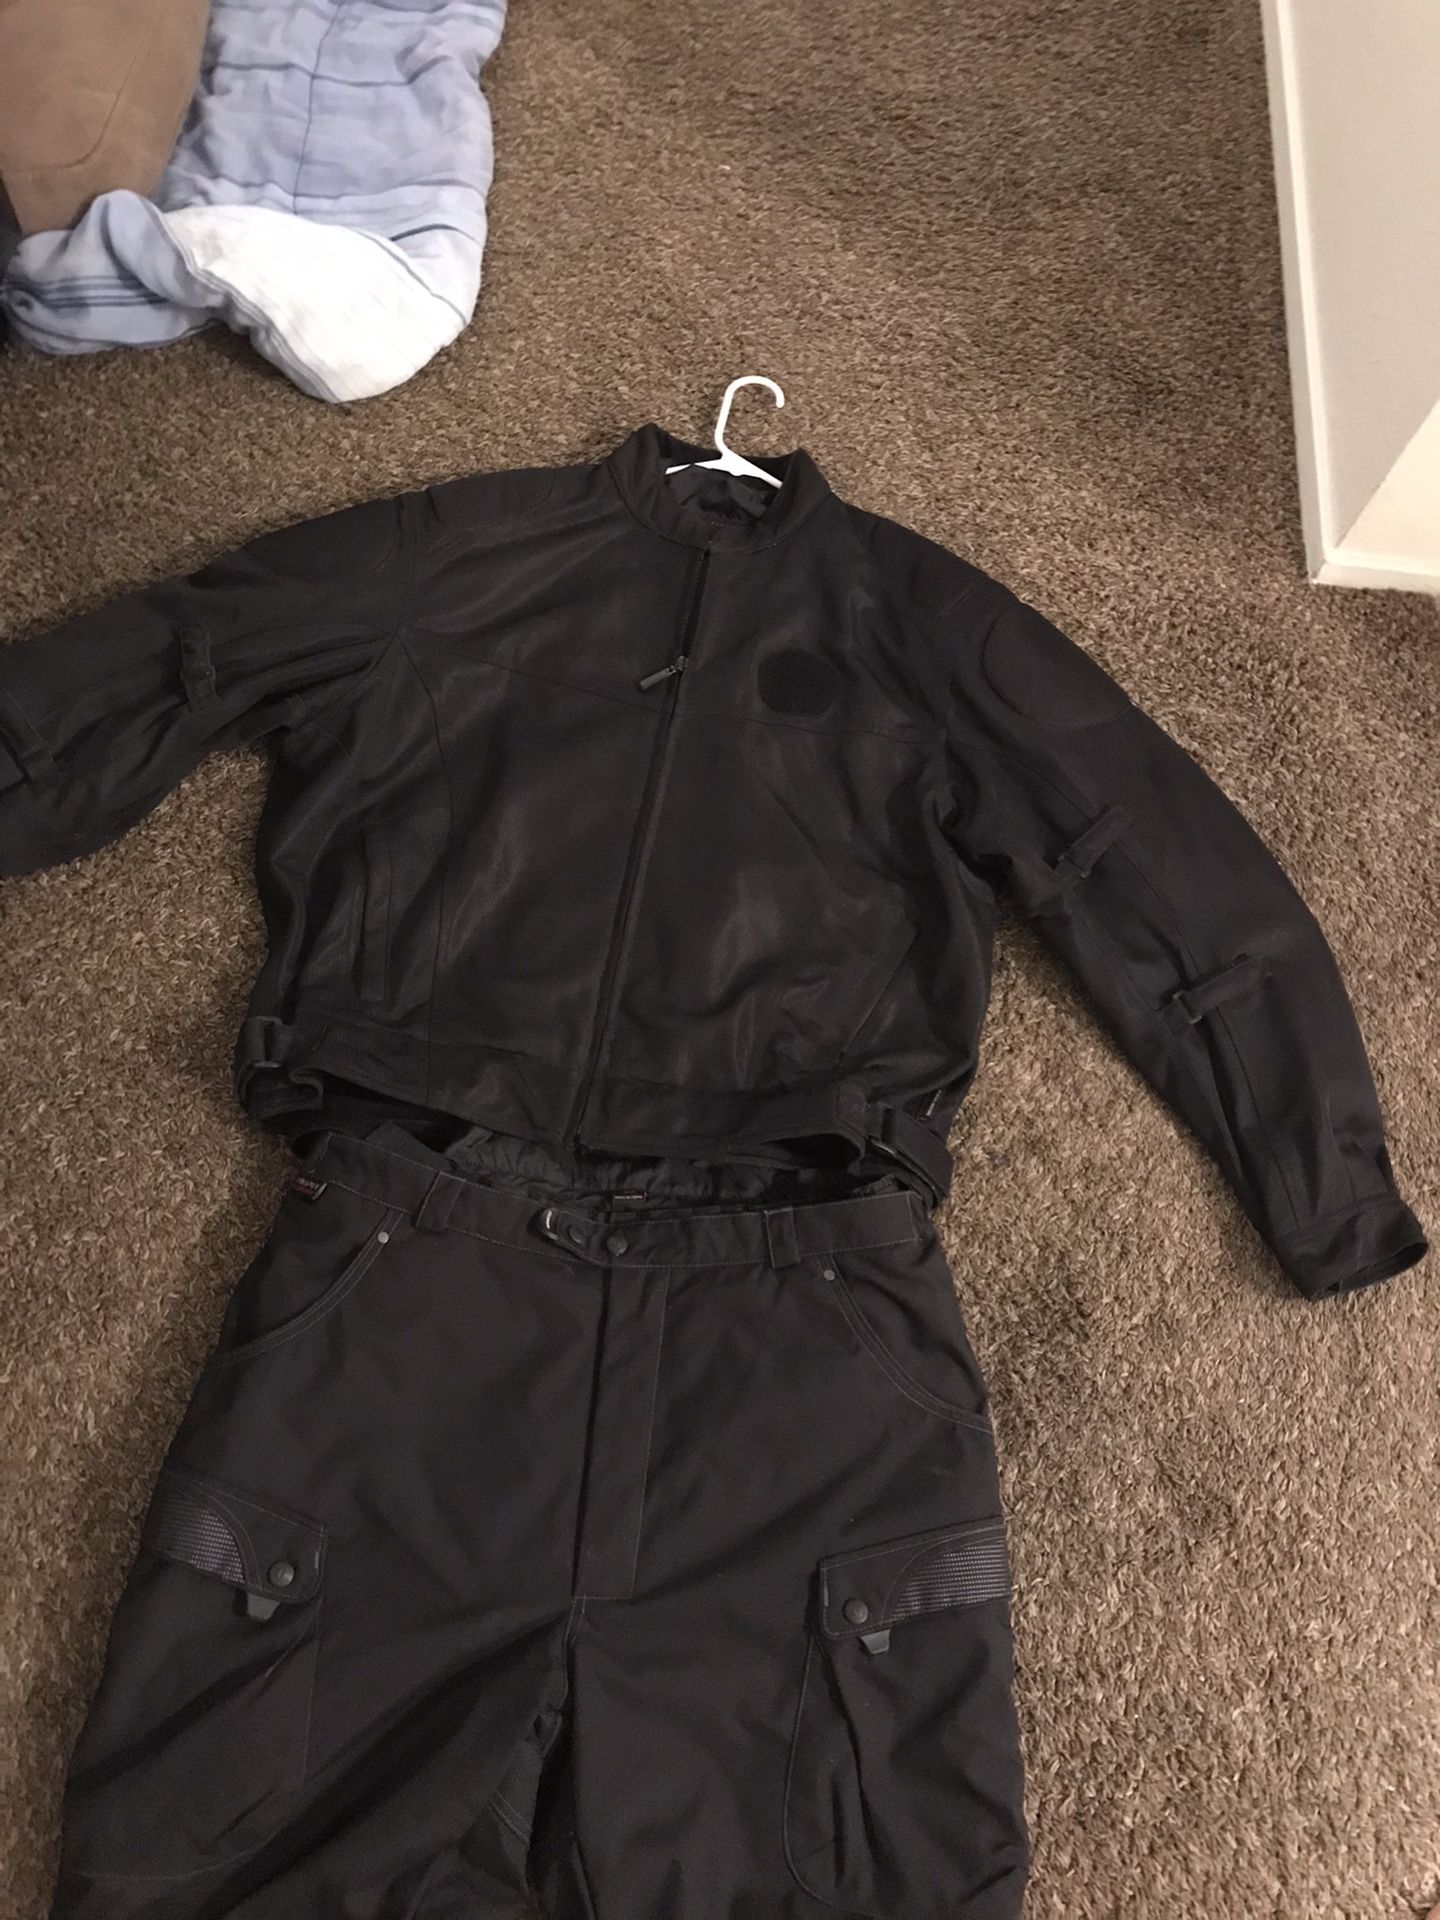 Motorcycle jacket and pants full suit